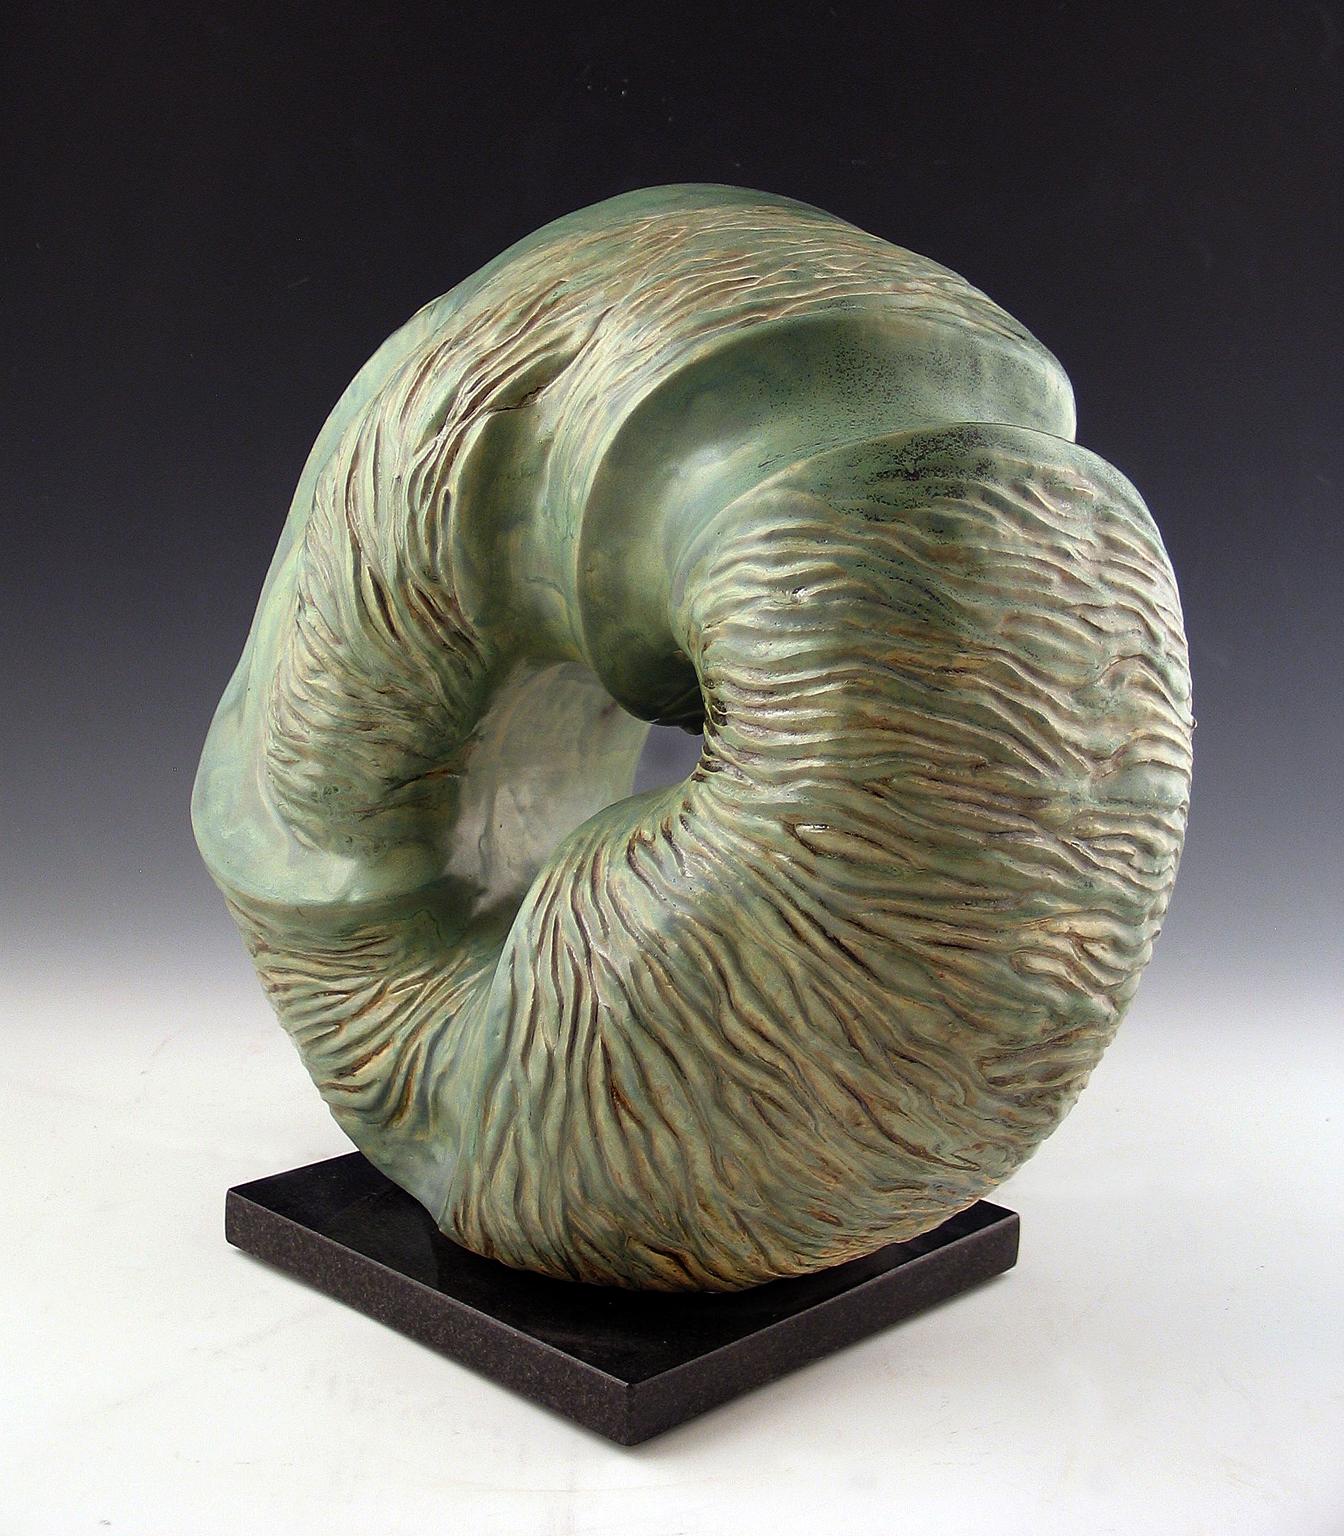 “Aqua Incision”, blue green circular ceramic, carved with flowing water lines  - Abstract Sculpture by Elaine Lorenz